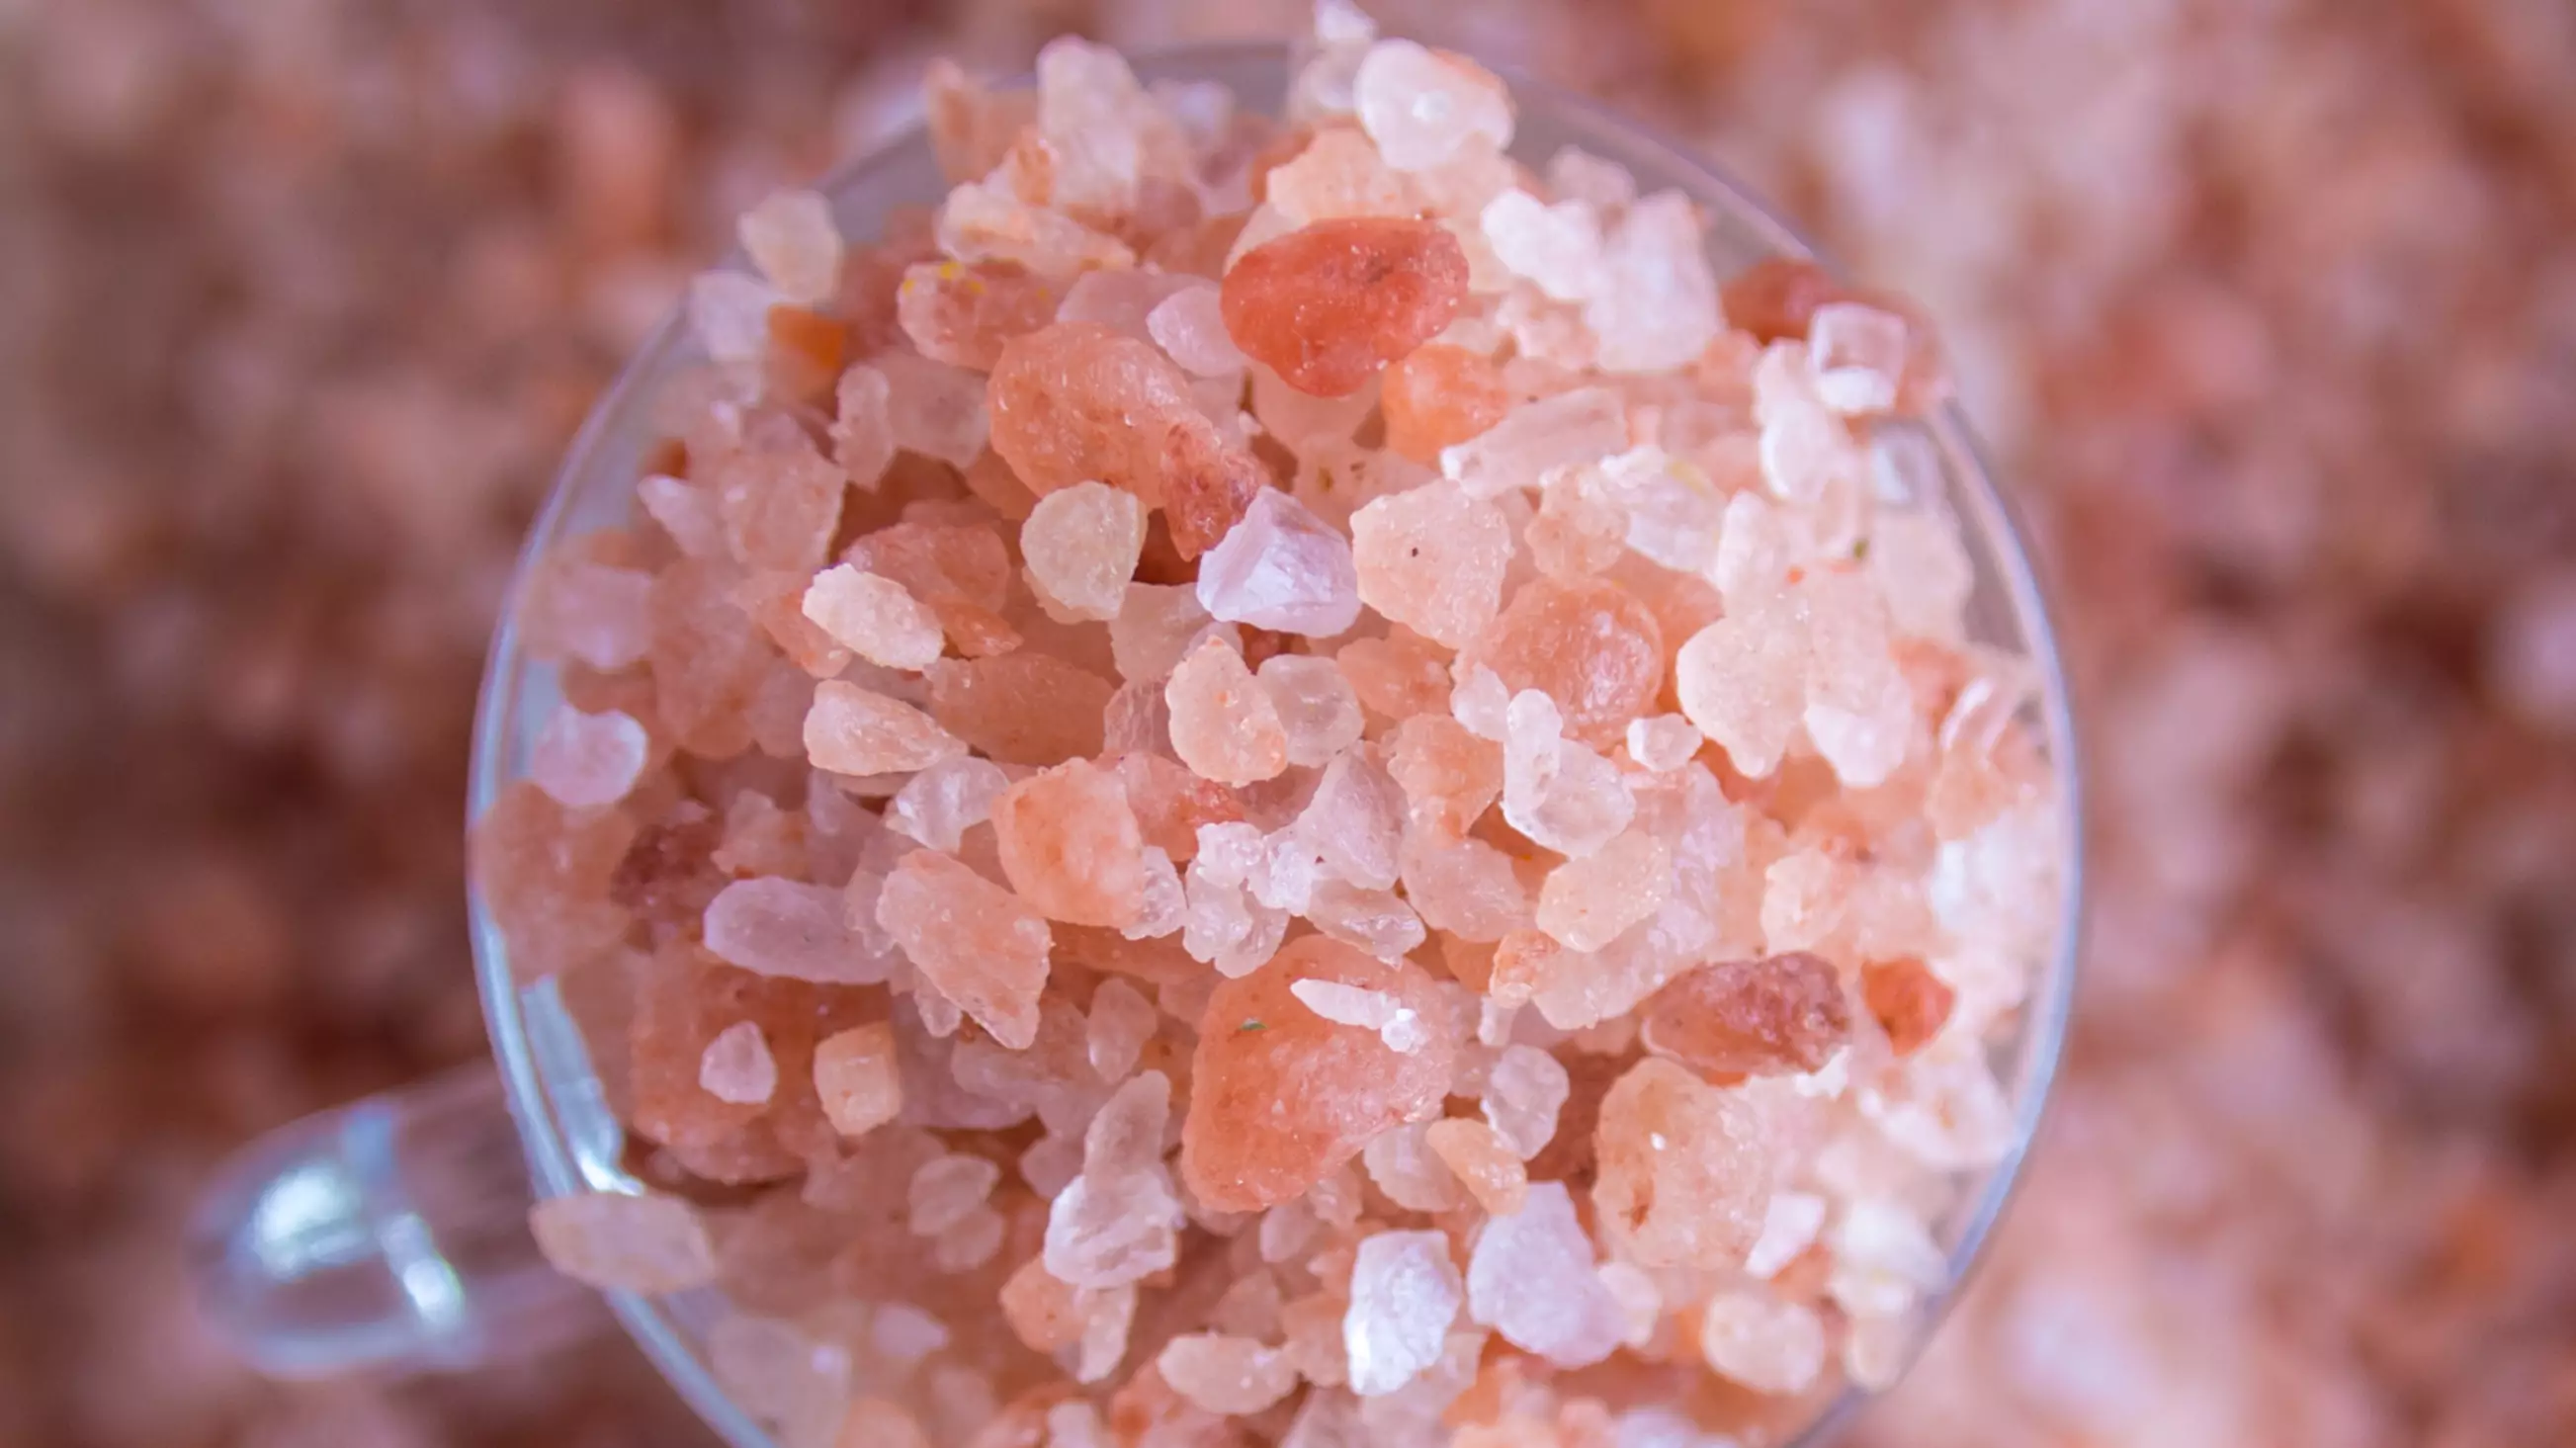 Pink Salt Found In Australia Revealed To Have Toxic Levels Of Lead And Harmful Metals